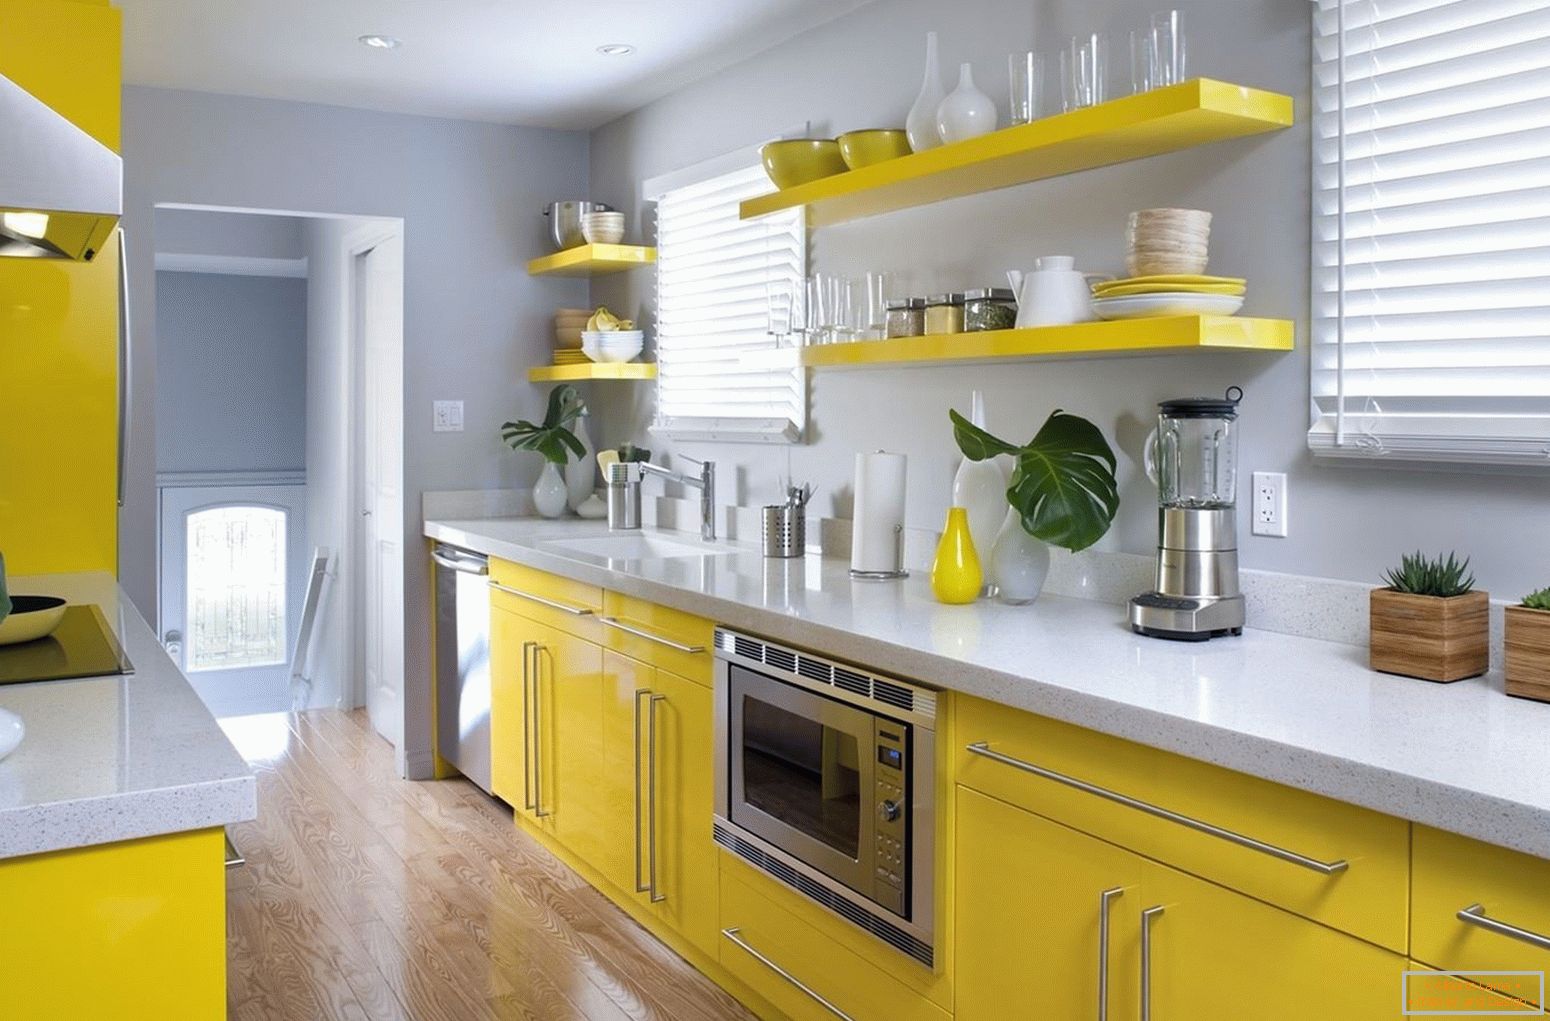 The combination of yellow furniture and gray walls in the kitchen